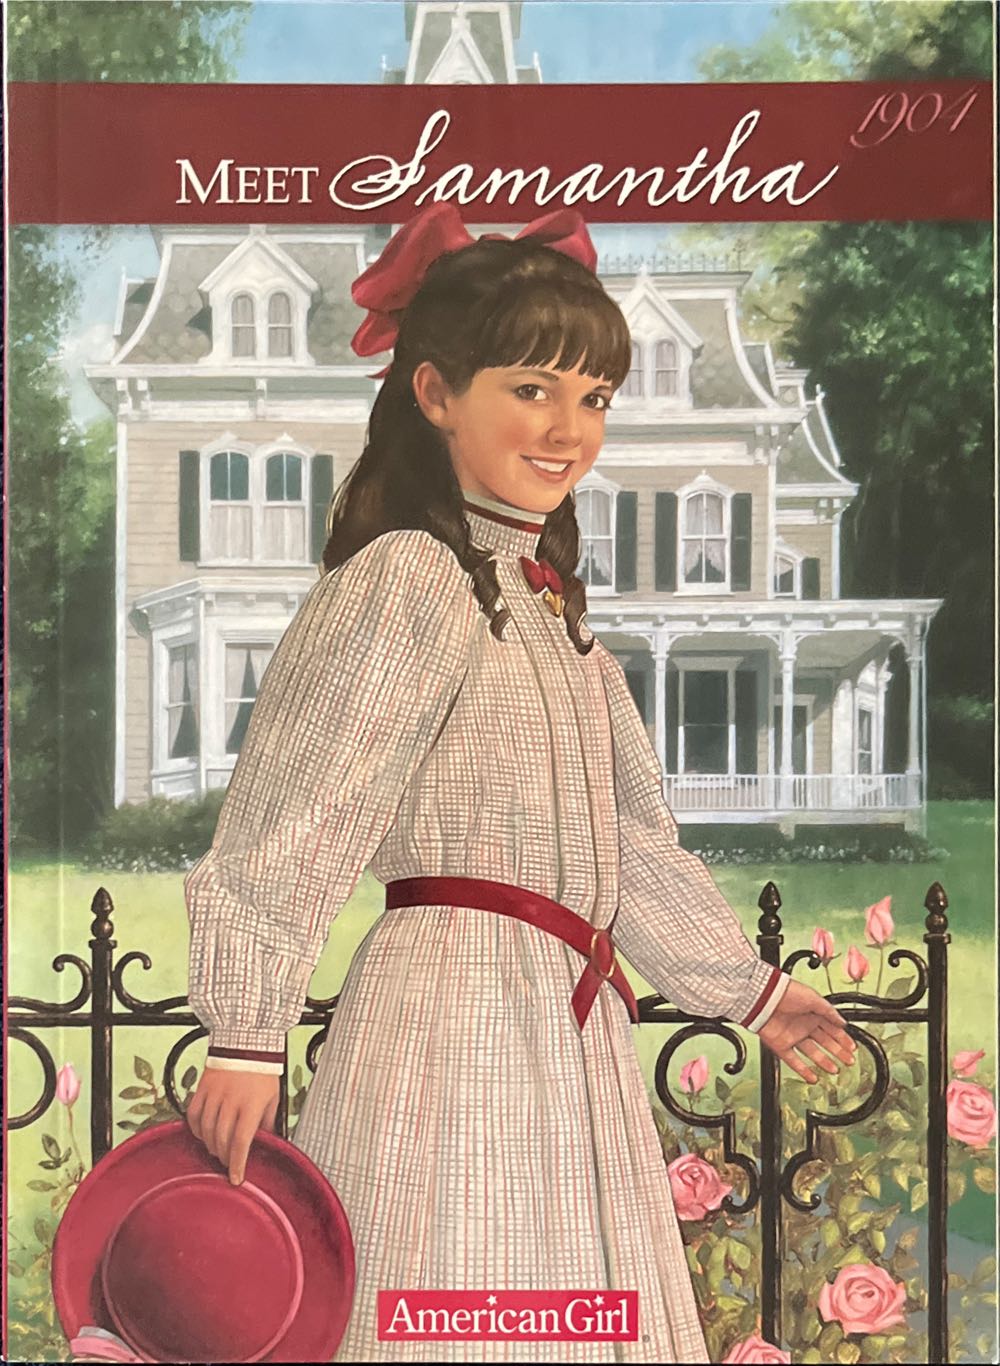 American Girl 1904: Samantha 1: Meet Samantha - 9 Yr Old Girl, President Roosevelt 1904 - Need #7 Nellie’s Surprise - Valerie Tripp (Pleasant Company Publications - Paperback) book collectible [Barcode 9780937295045] - Main Image 3